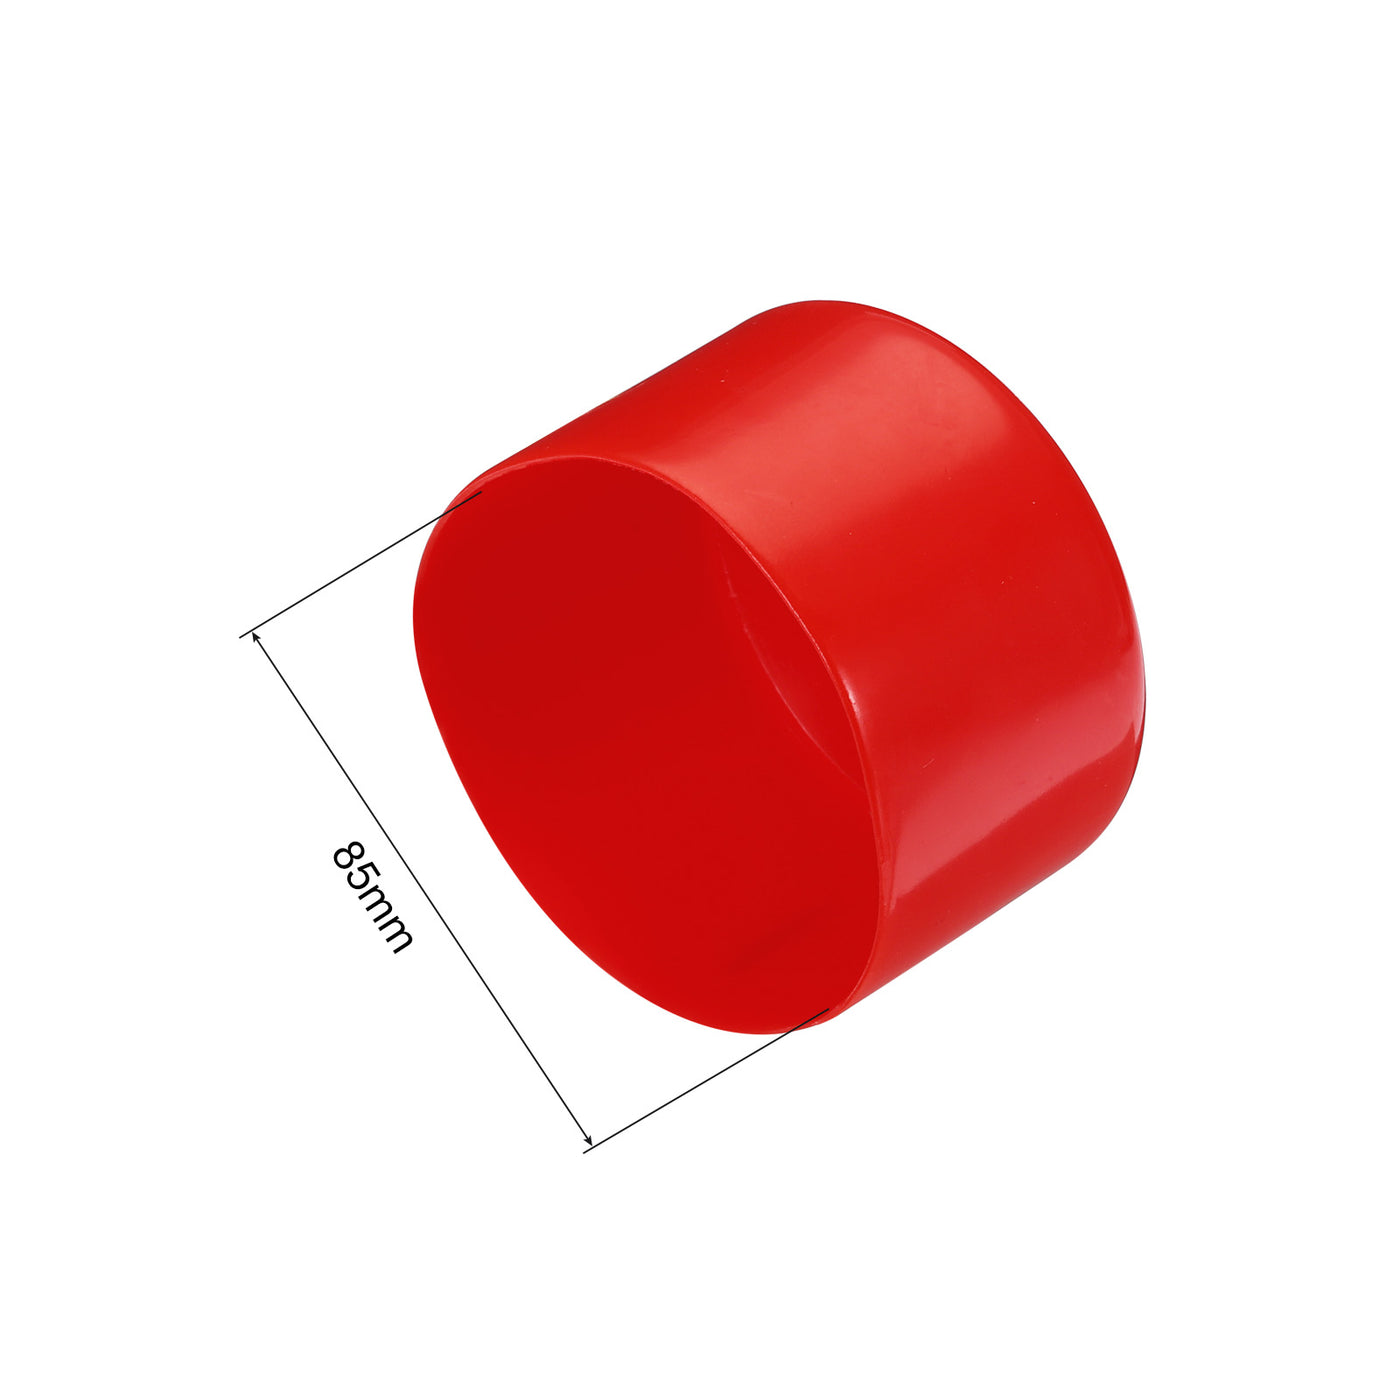 uxcell Uxcell Rubber End Caps 85mm ID Vinyl Round Tube Bolt Cap Cover Screw Thread Protectors Red